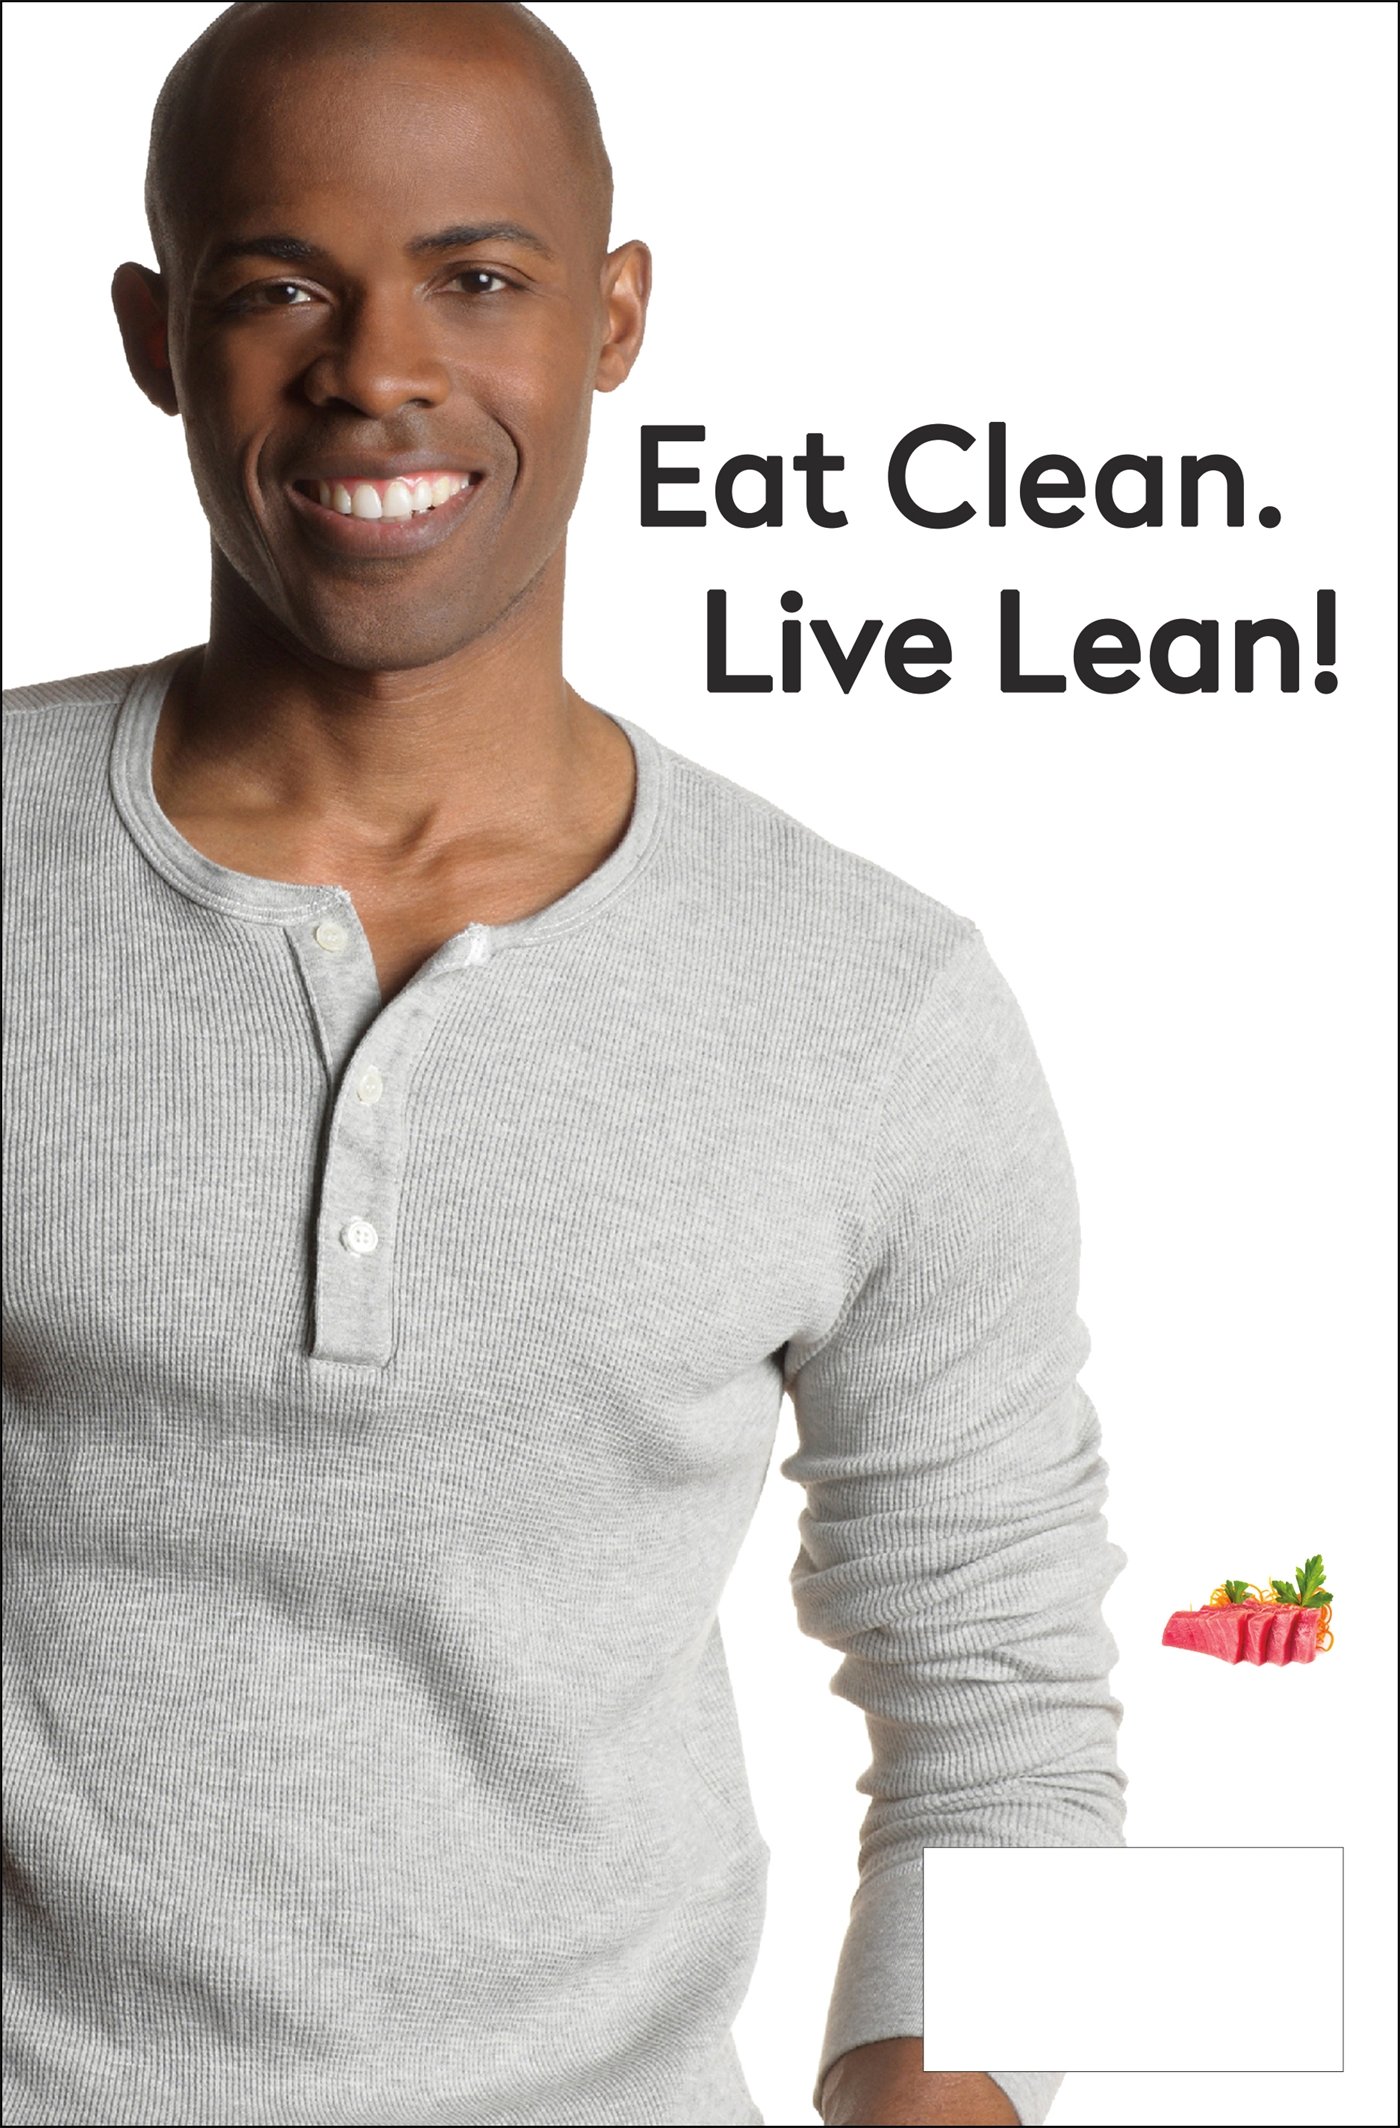 The Clean 20: 20 Foods, 20 Days, Total Transformation